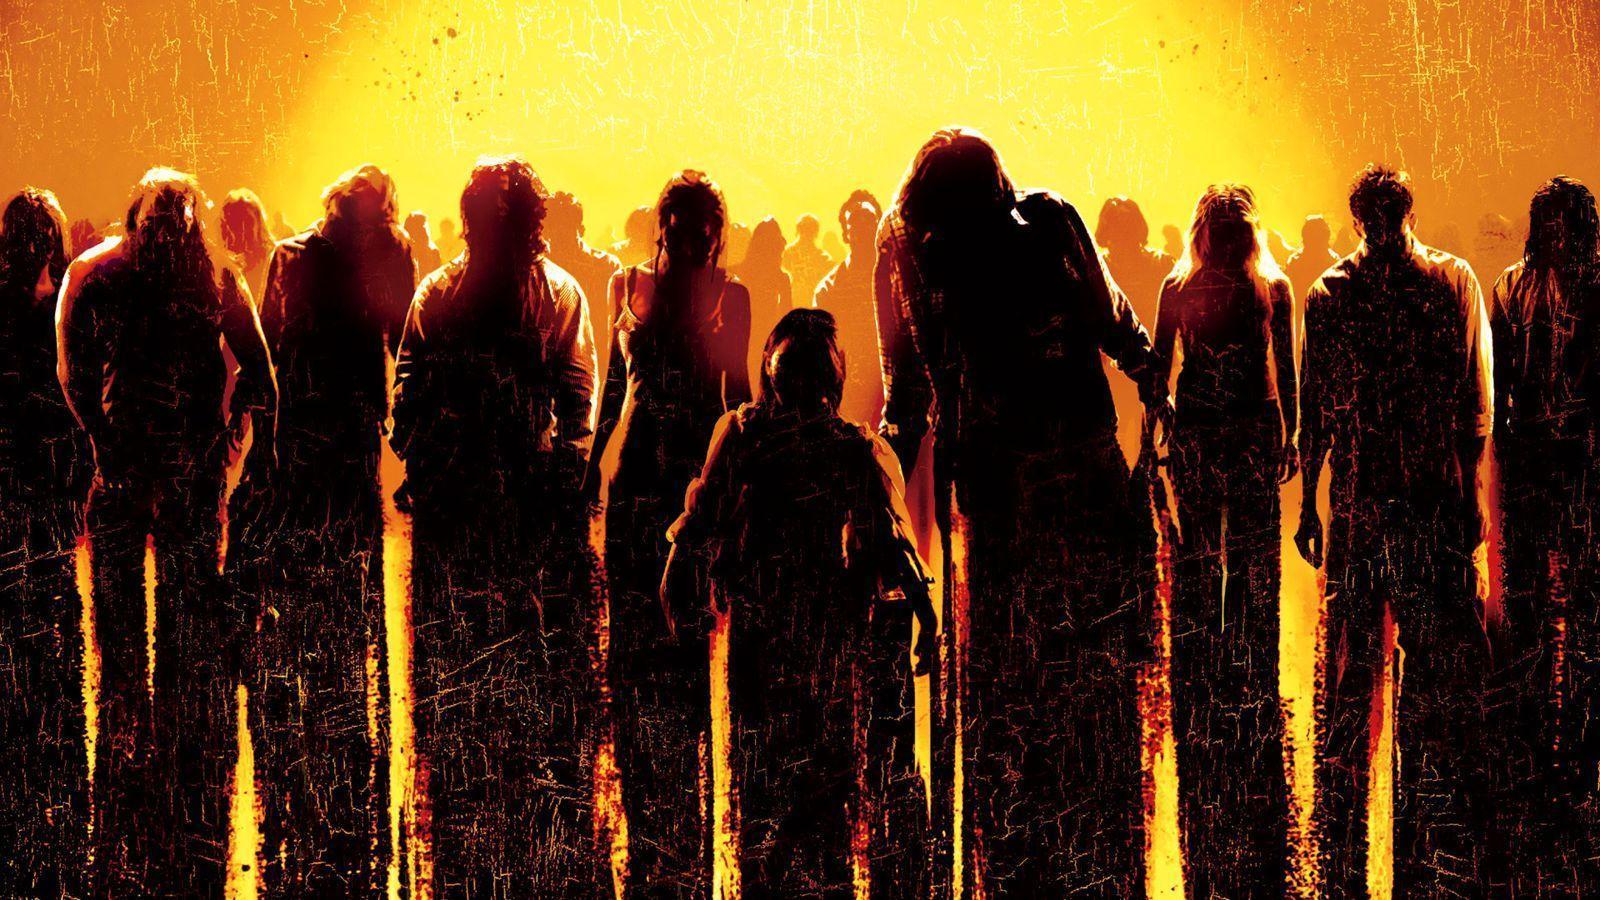 Fear the Walking Dead. AMC's new foray into the dead!